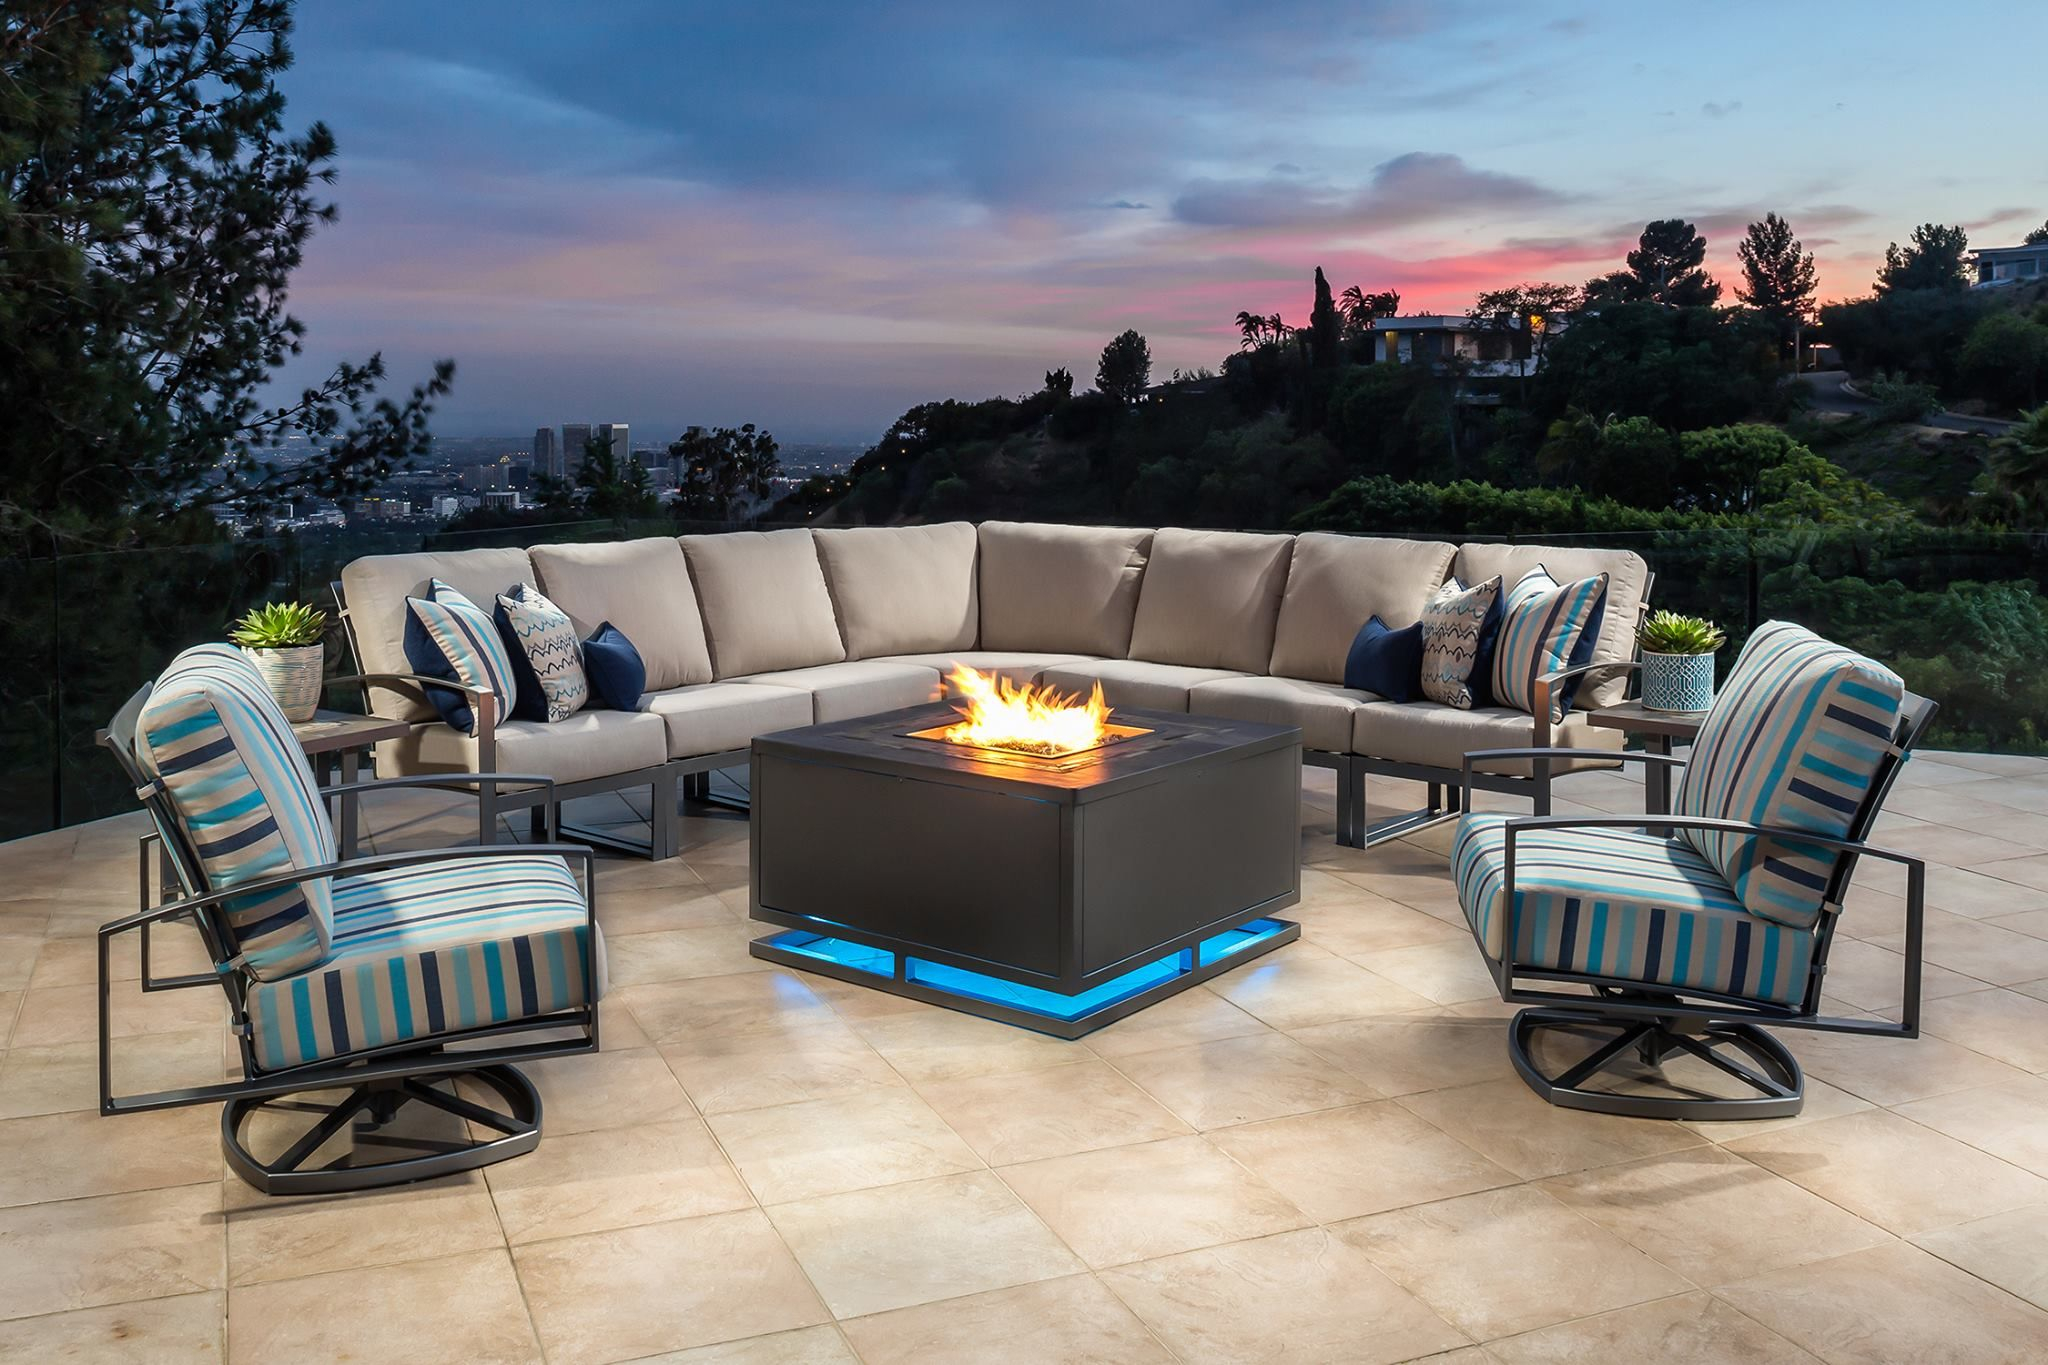 Fire Pit With Under Glow Lighting For The 2018 Outdoor Patio intended for measurements 2048 X 1365